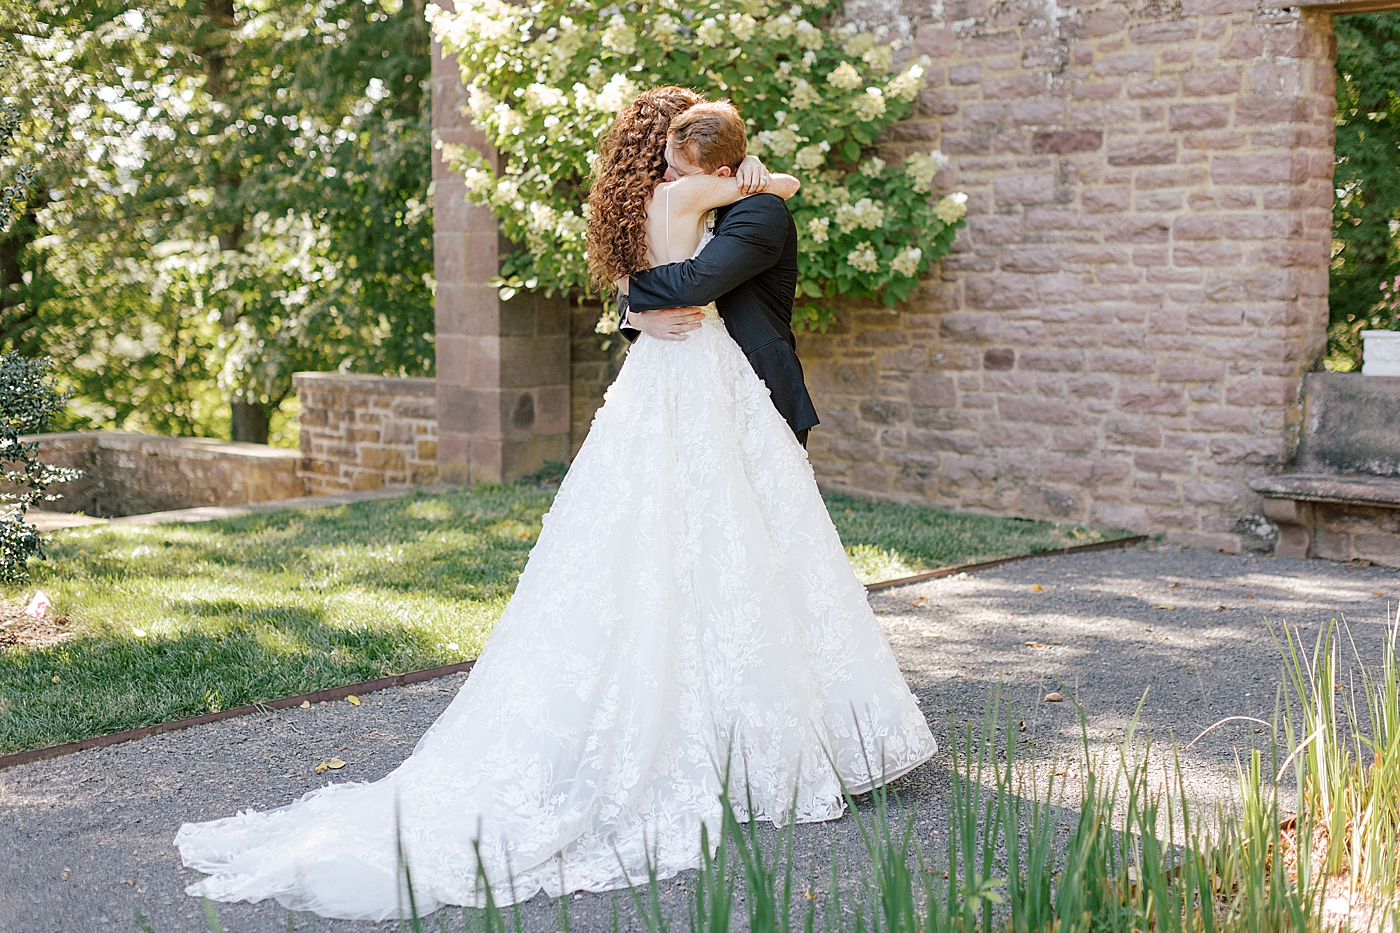 Bride and groom embracing at their first look during Tyler Gardens Wedding | Image by Hope Helmuth Photography